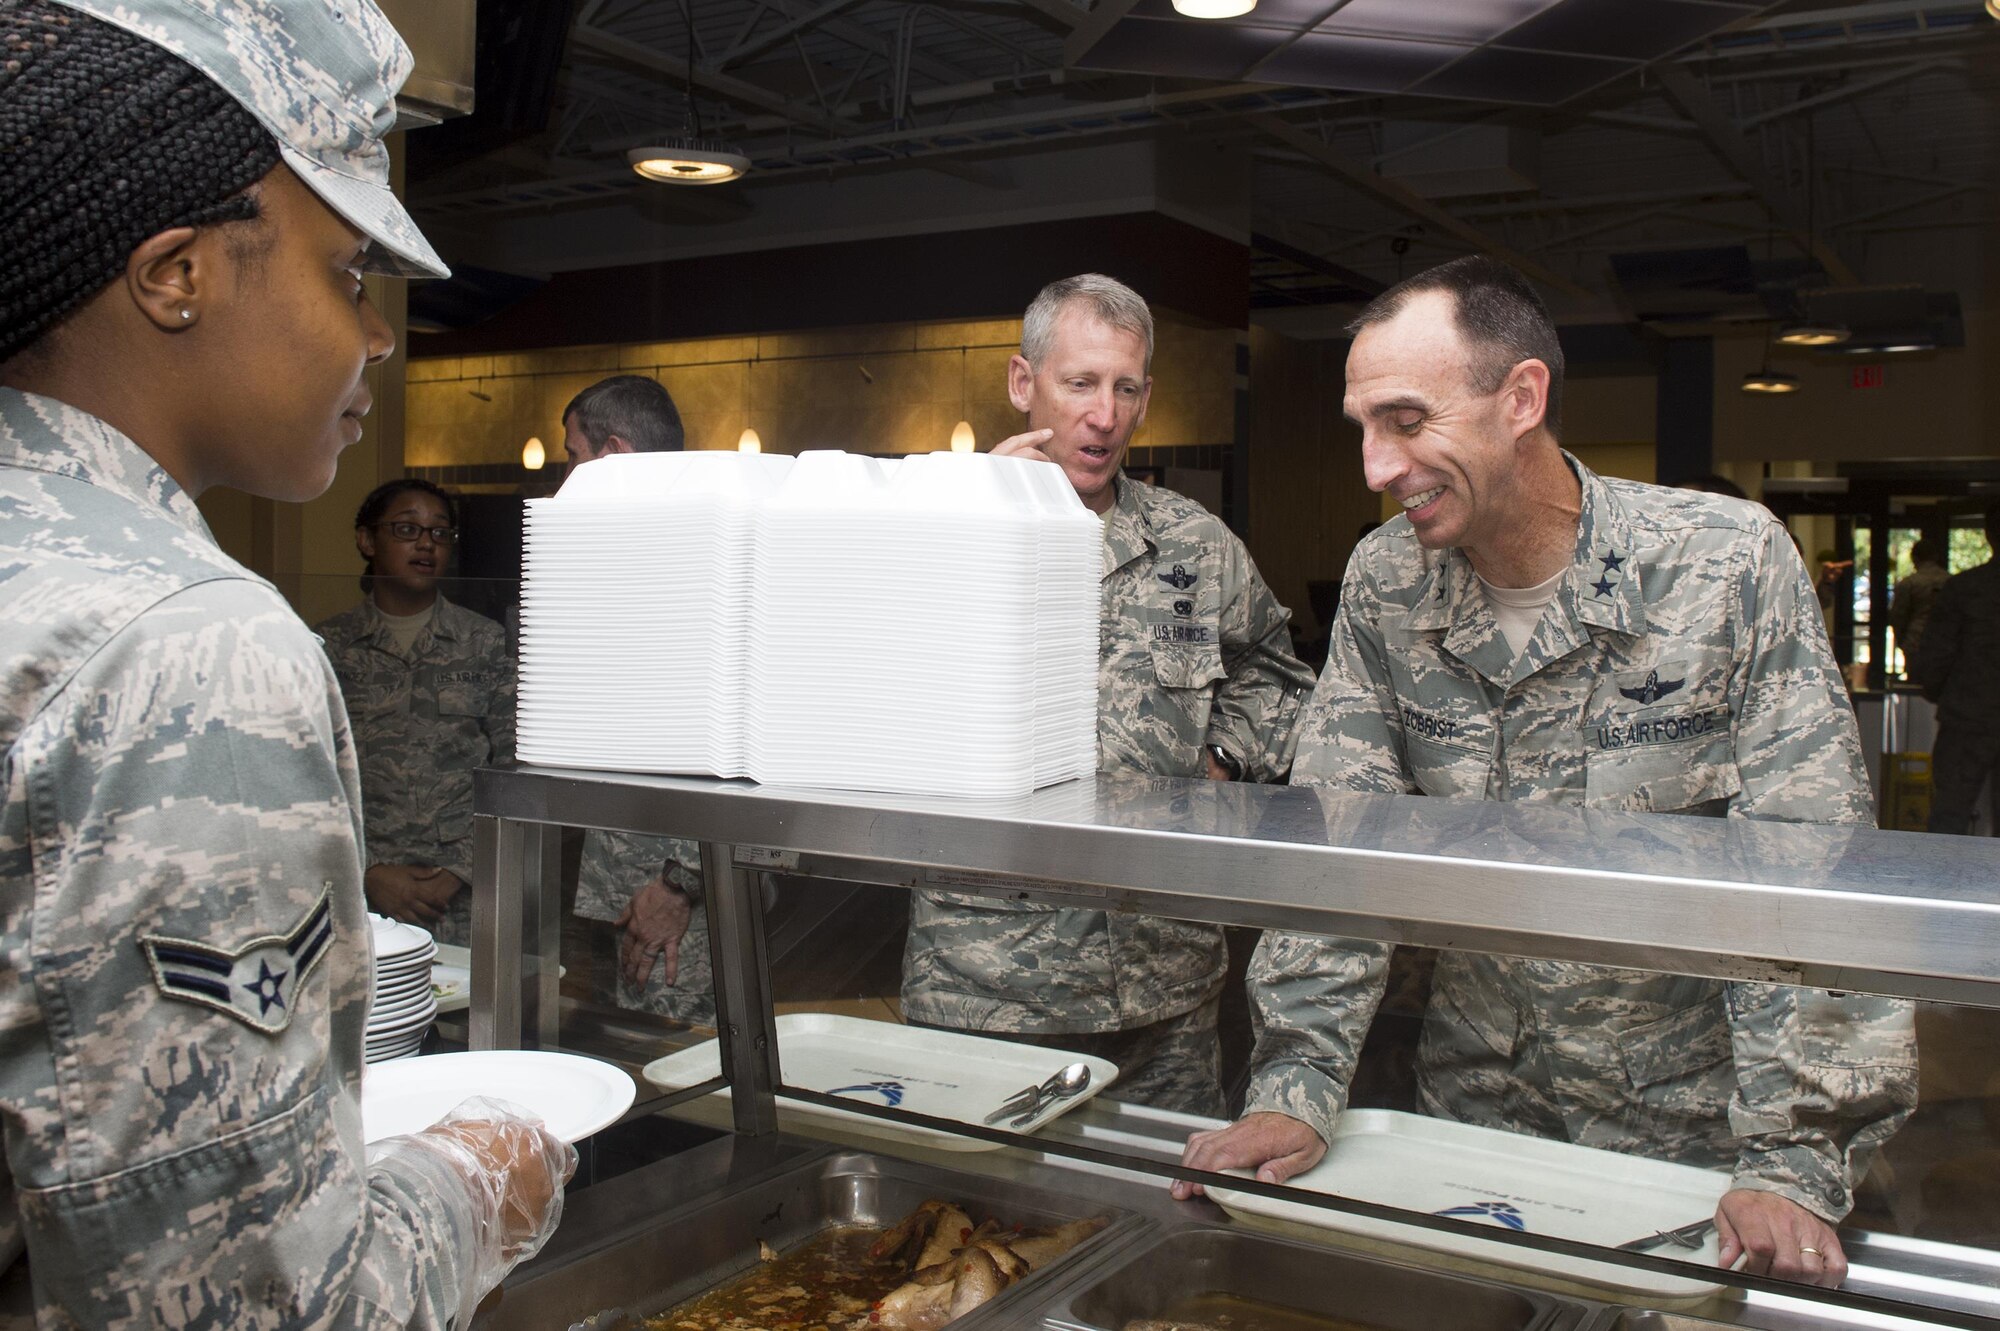 U.S. Air Force Airman 1st Class Shakilah Bates, 23d Force Support Squadron food service specialist, serves food to Maj. Gen. Scott Zobrist, Ninth Air Force commander, during his visit to the Georgia Pines Dining Facility, June 28, 2016, at Moody Air Force Base, Ga. Zobrist toured Moody’s facility designed by and for Airmen to experience first-hand some of the resources available to Airmen. (U.S. Air Force photo by Senior Airman Ceaira Young/Released)